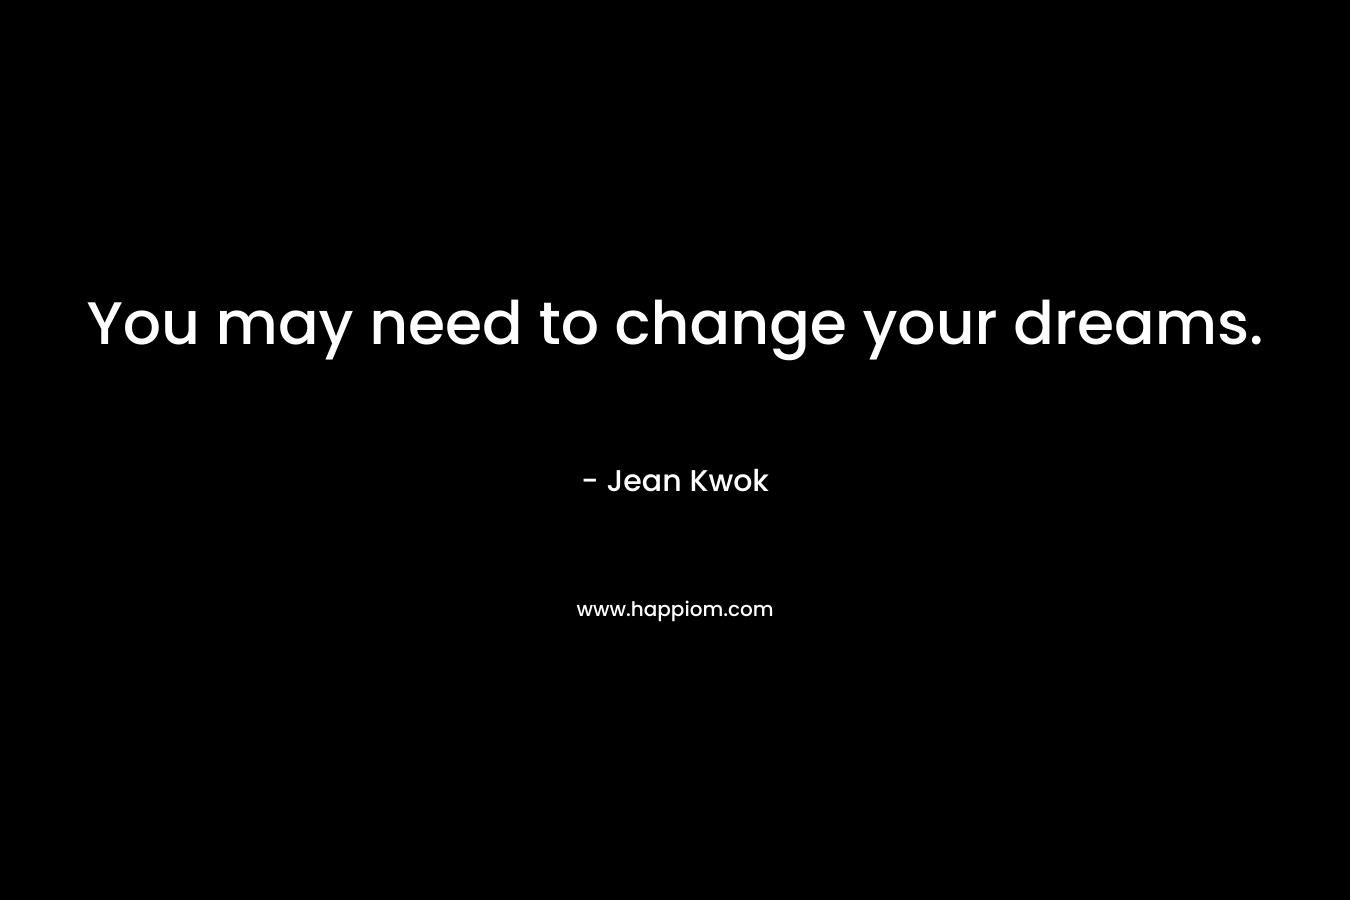 You may need to change your dreams. – Jean Kwok